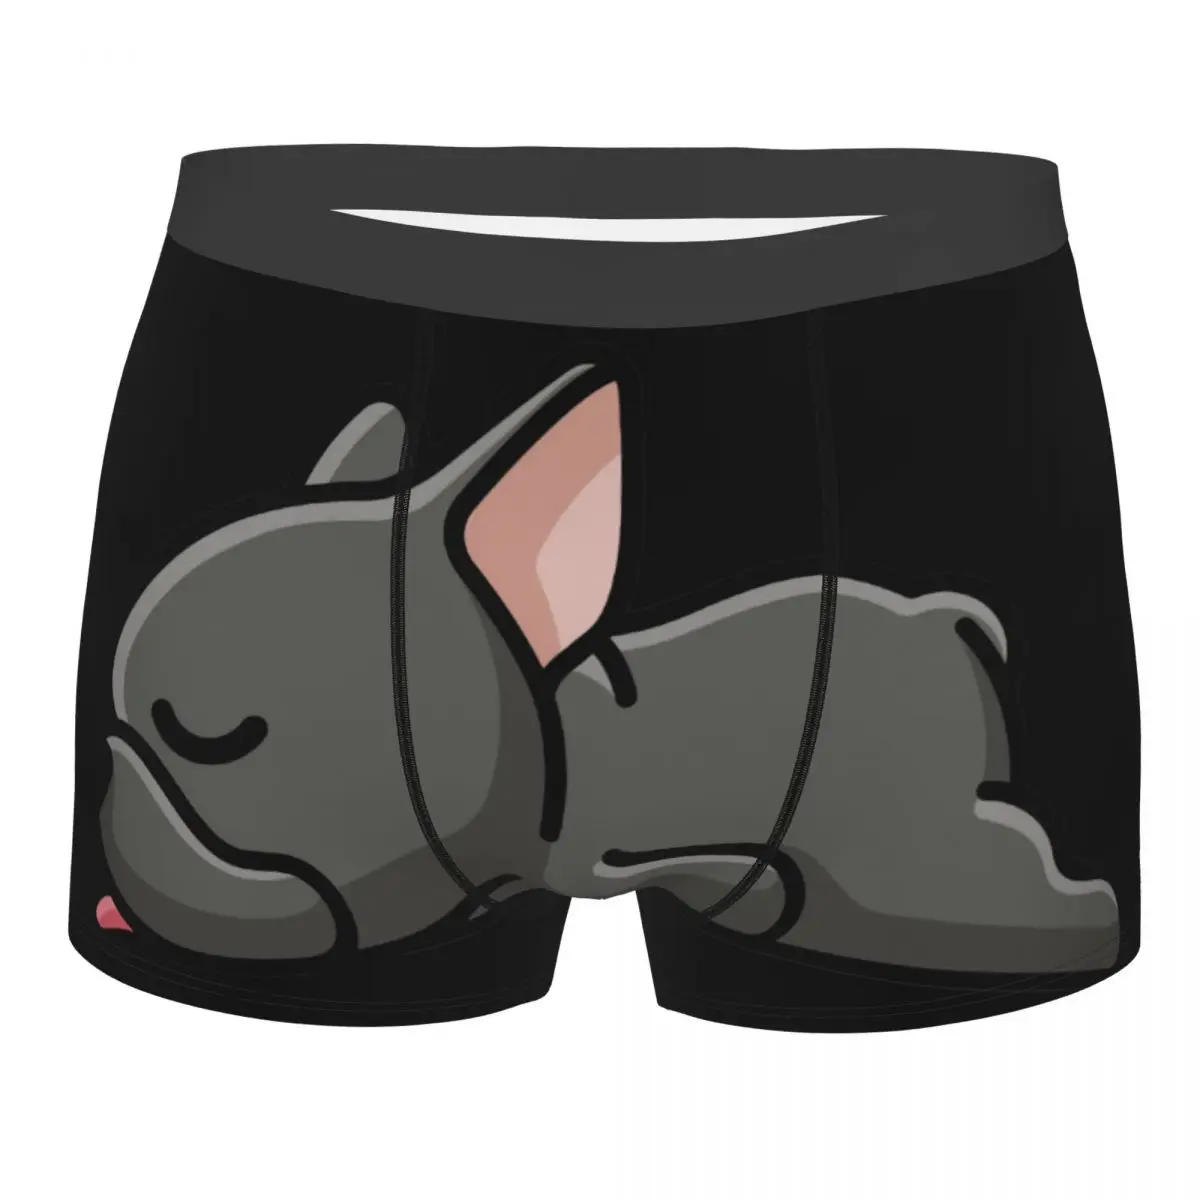 

Kawaii Cute French Bulldog Puppy Pet Men's Boxer Briefs Highly Breathable Underpants High Quality 3D Print Shorts Gift Idea